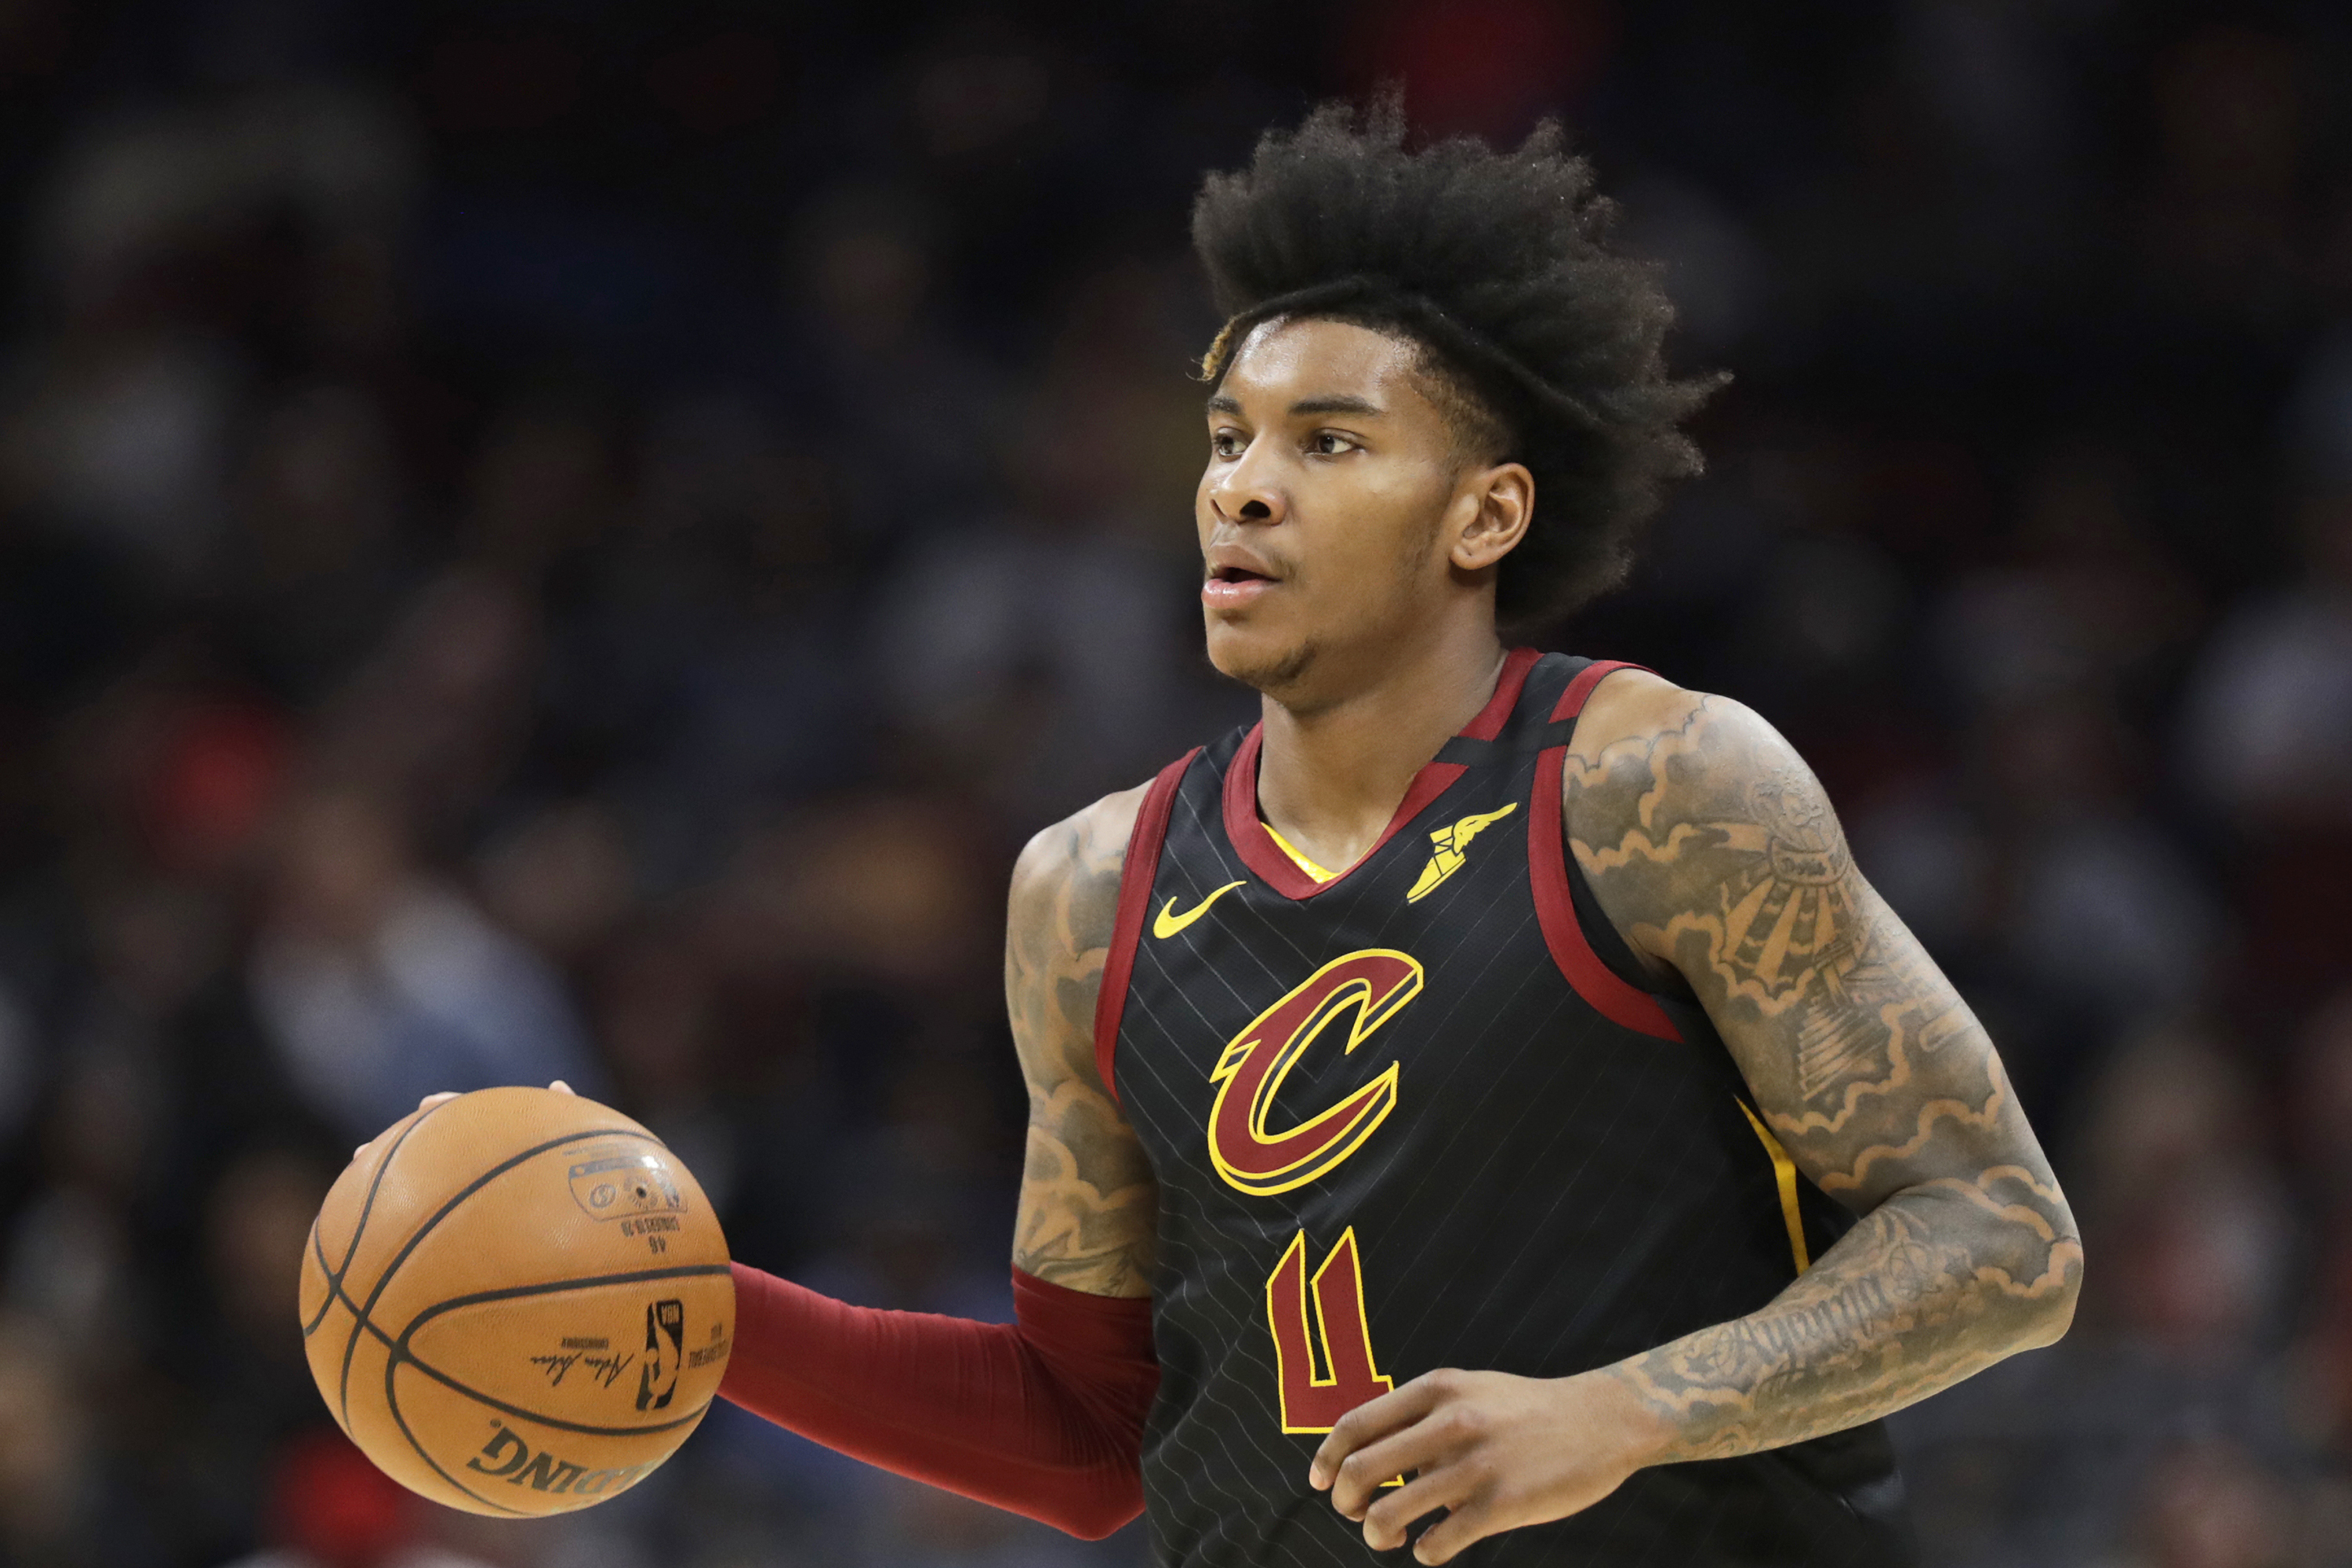 Kevin Porter Jr. returns from injury ahead of Rockets match